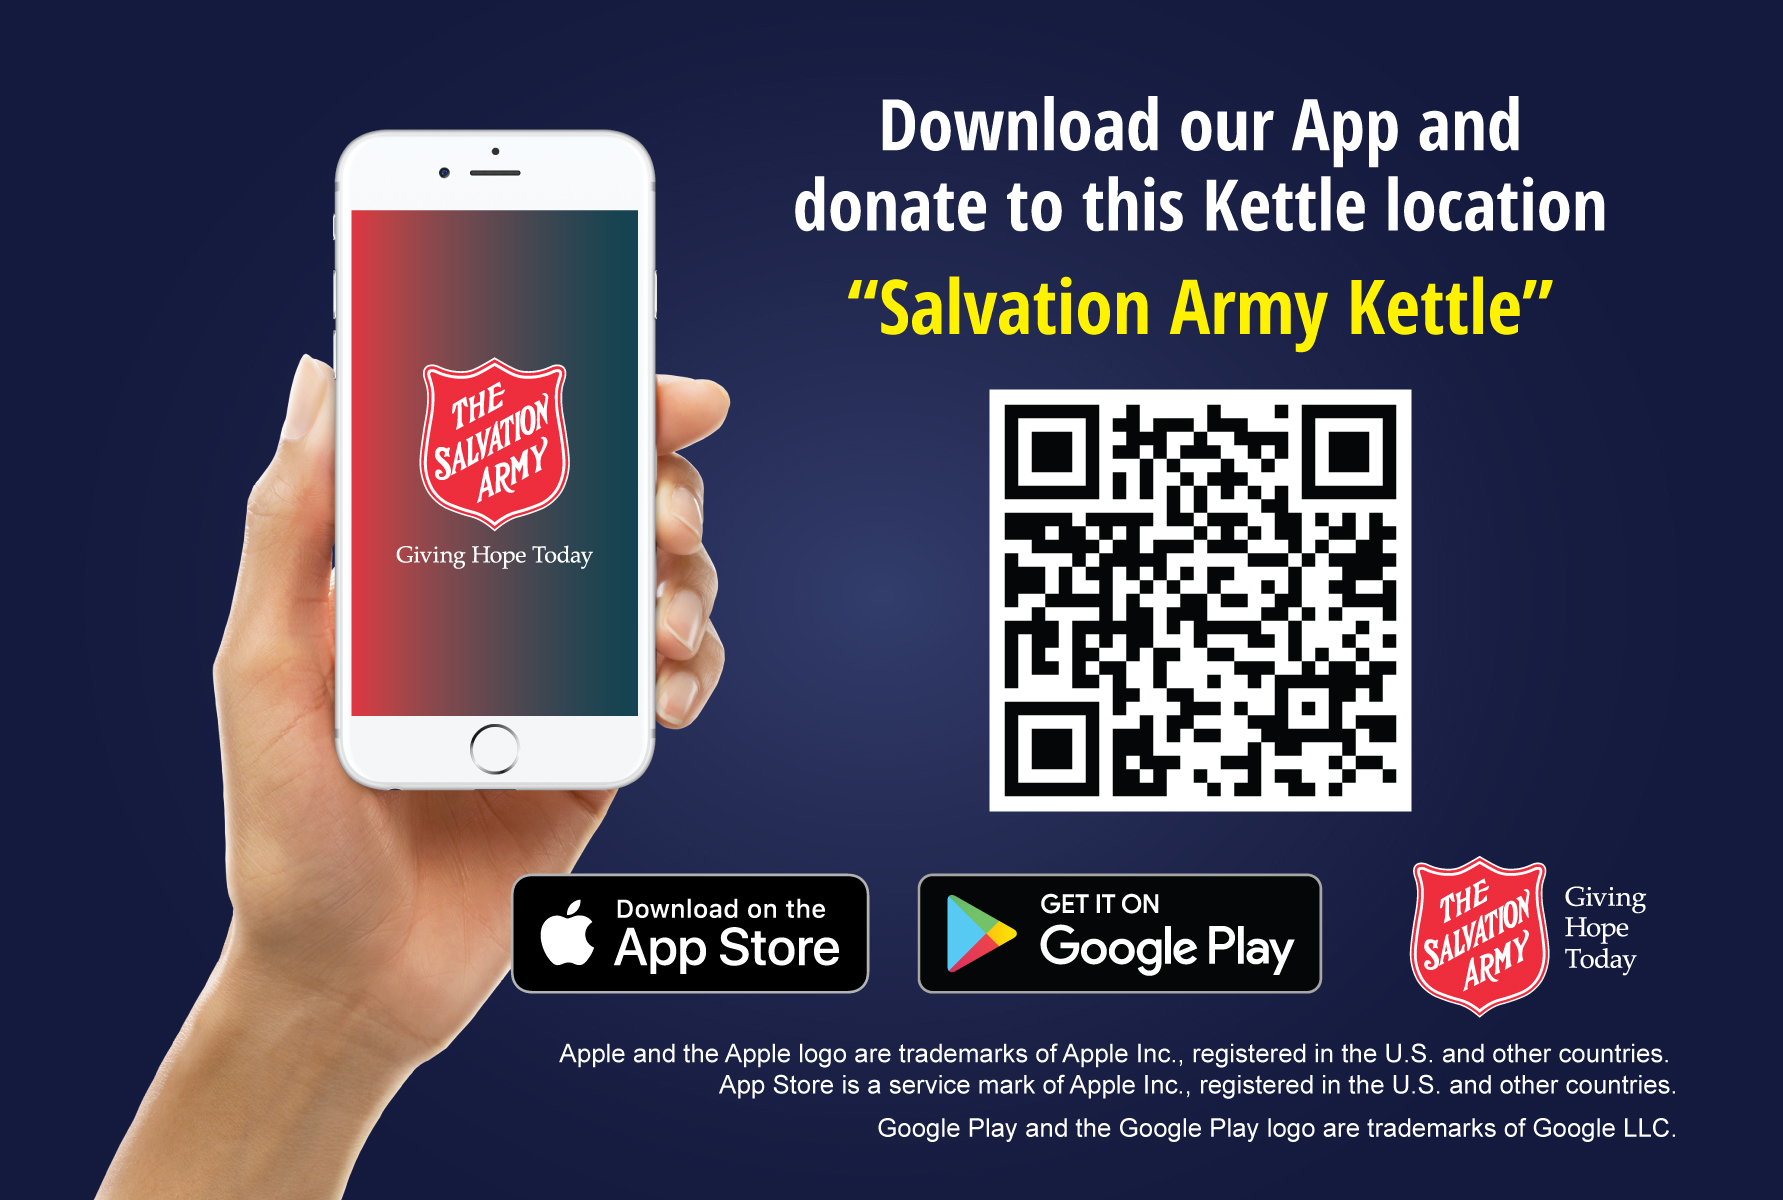 Salvation Army Kettle App Offers Mobile Solution to Giving